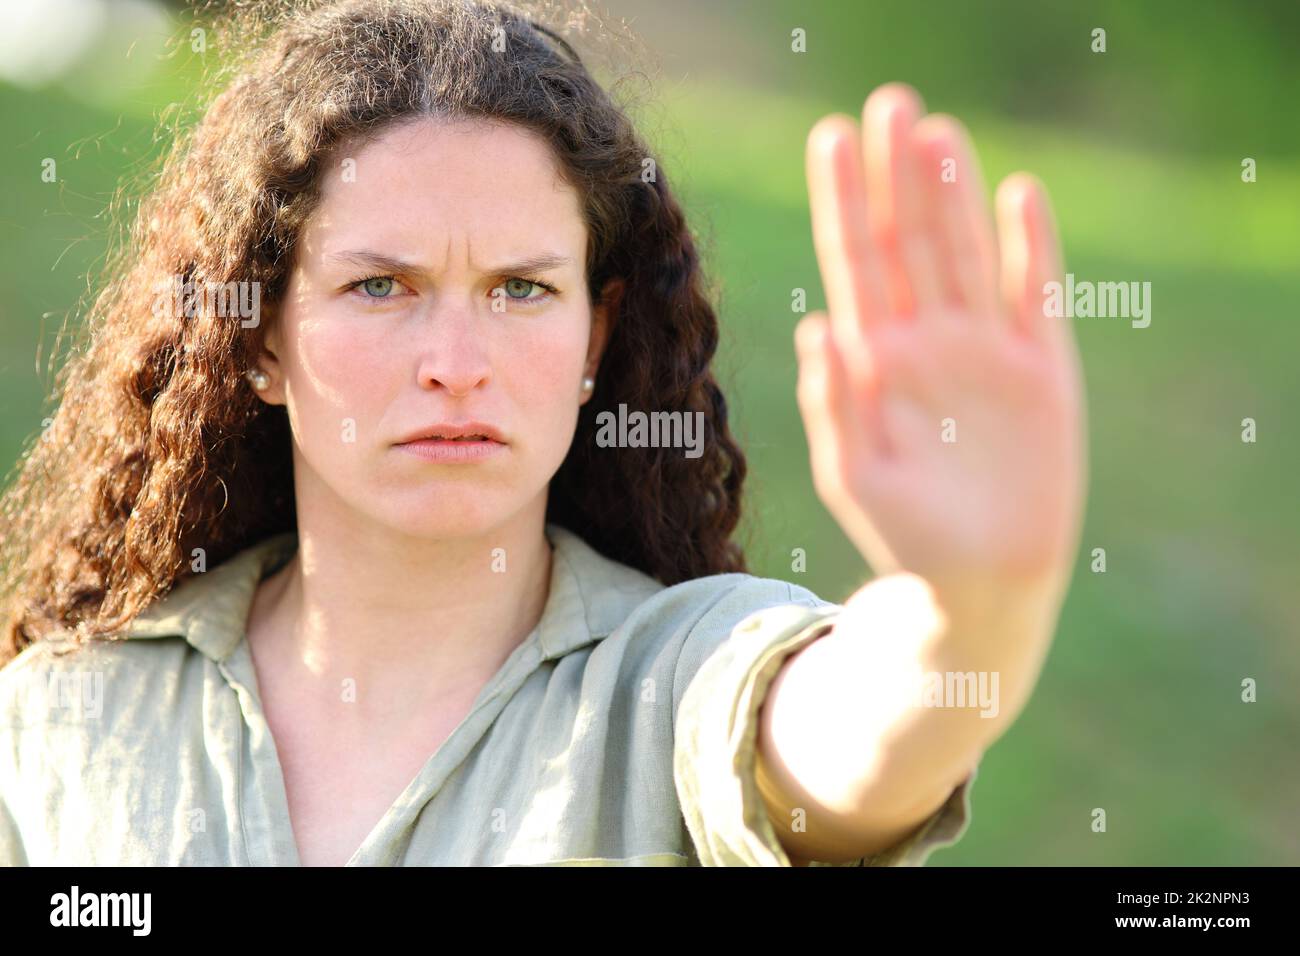 Angry woman gesturing stop with palm in a park Stock Photo